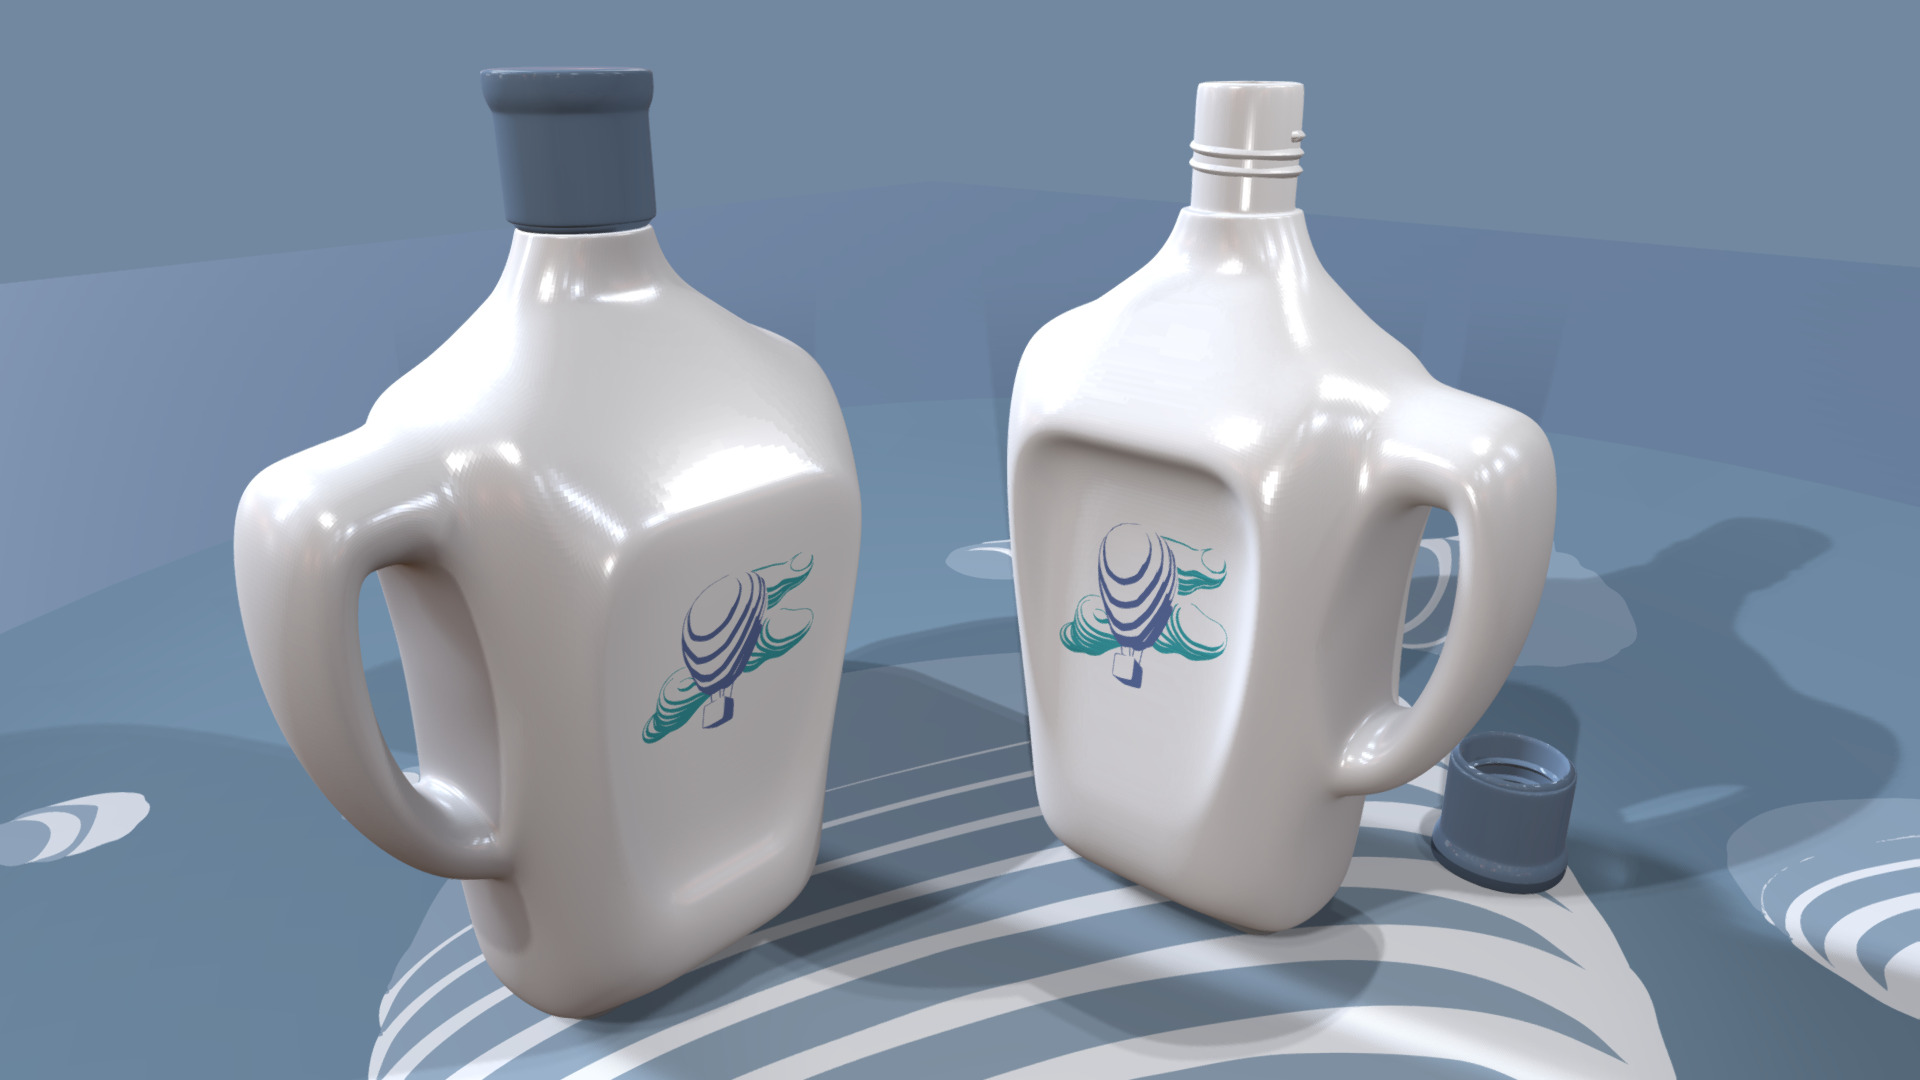 3D model BOTTLE on blue background - This is a 3D model of the BOTTLE on blue background. The 3D model is about a couple of white jugs.